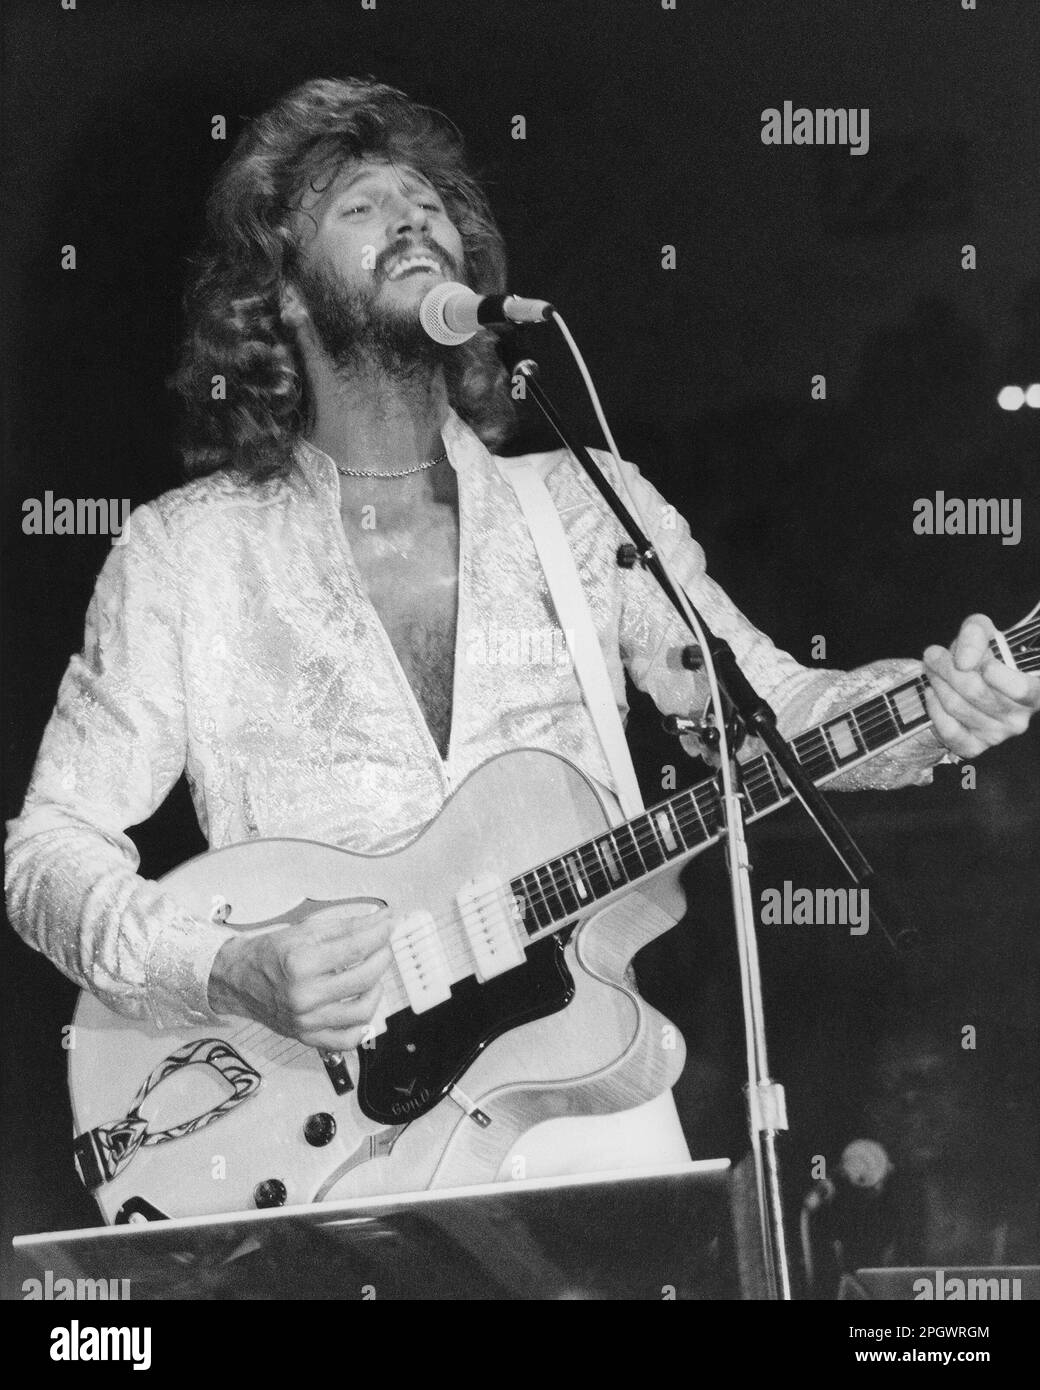 Barry Gibb Leading the Bee Gees at the Providence, Rhode Island, Civic Center, USA, August 27, 1979. Stockfoto